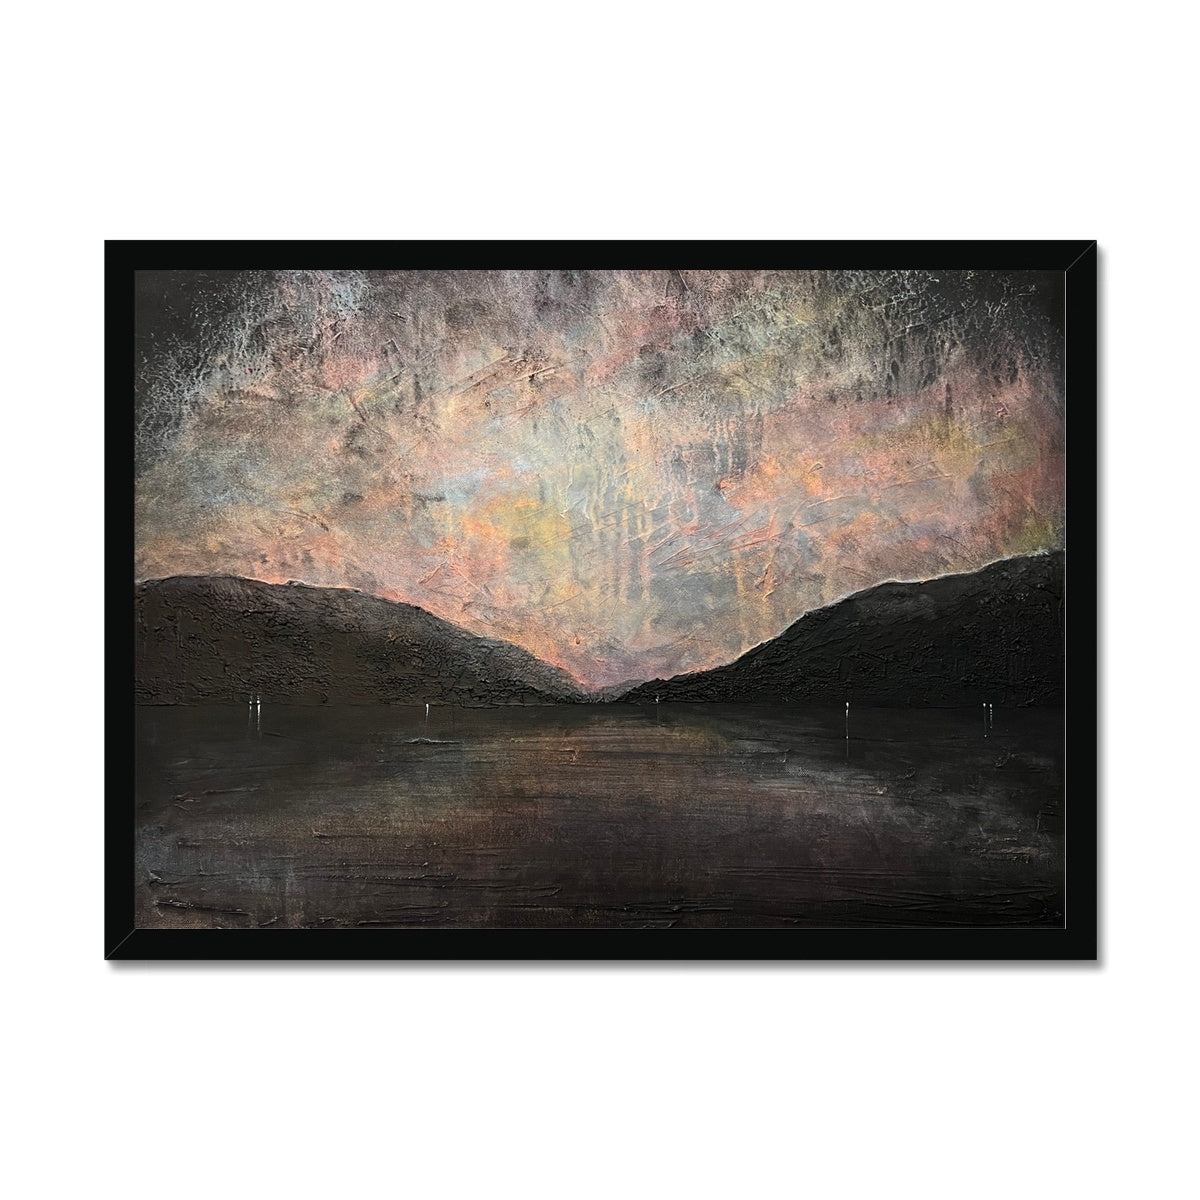 A Brooding Loch Lomond Painting | Framed Prints From Scotland-Framed Prints-Scottish Lochs & Mountains Art Gallery-A2 Landscape-Black Frame-Paintings, Prints, Homeware, Art Gifts From Scotland By Scottish Artist Kevin Hunter